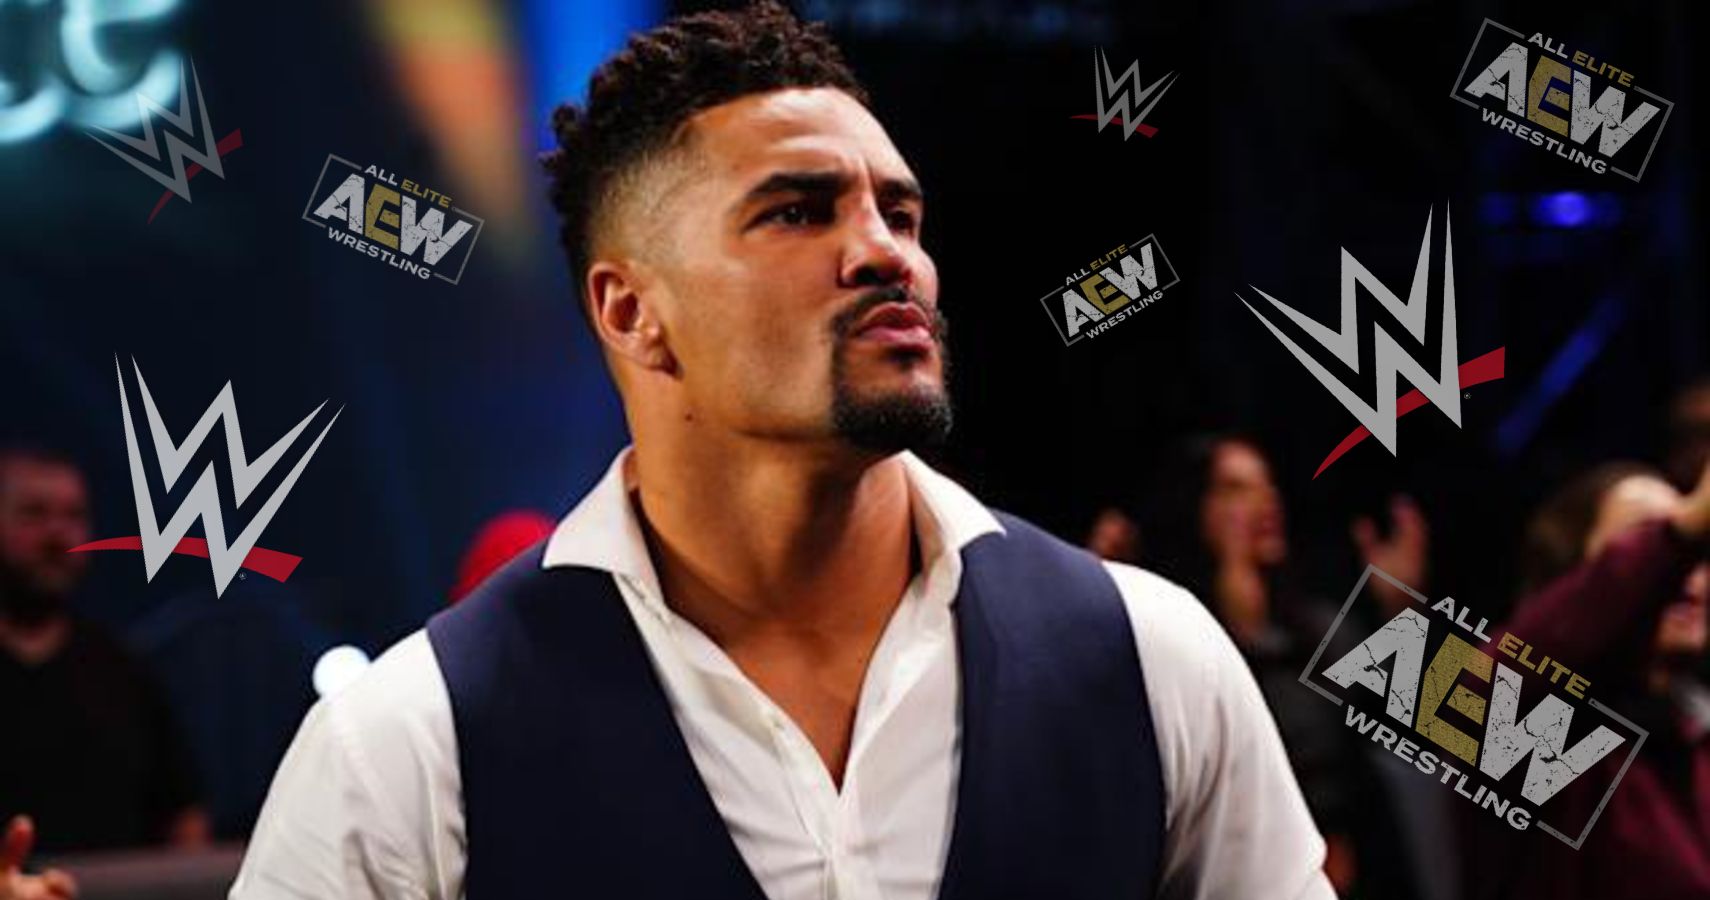 Former Olympic Boxer Anthony Ogogo rejected a WWE offer to sign with AEW